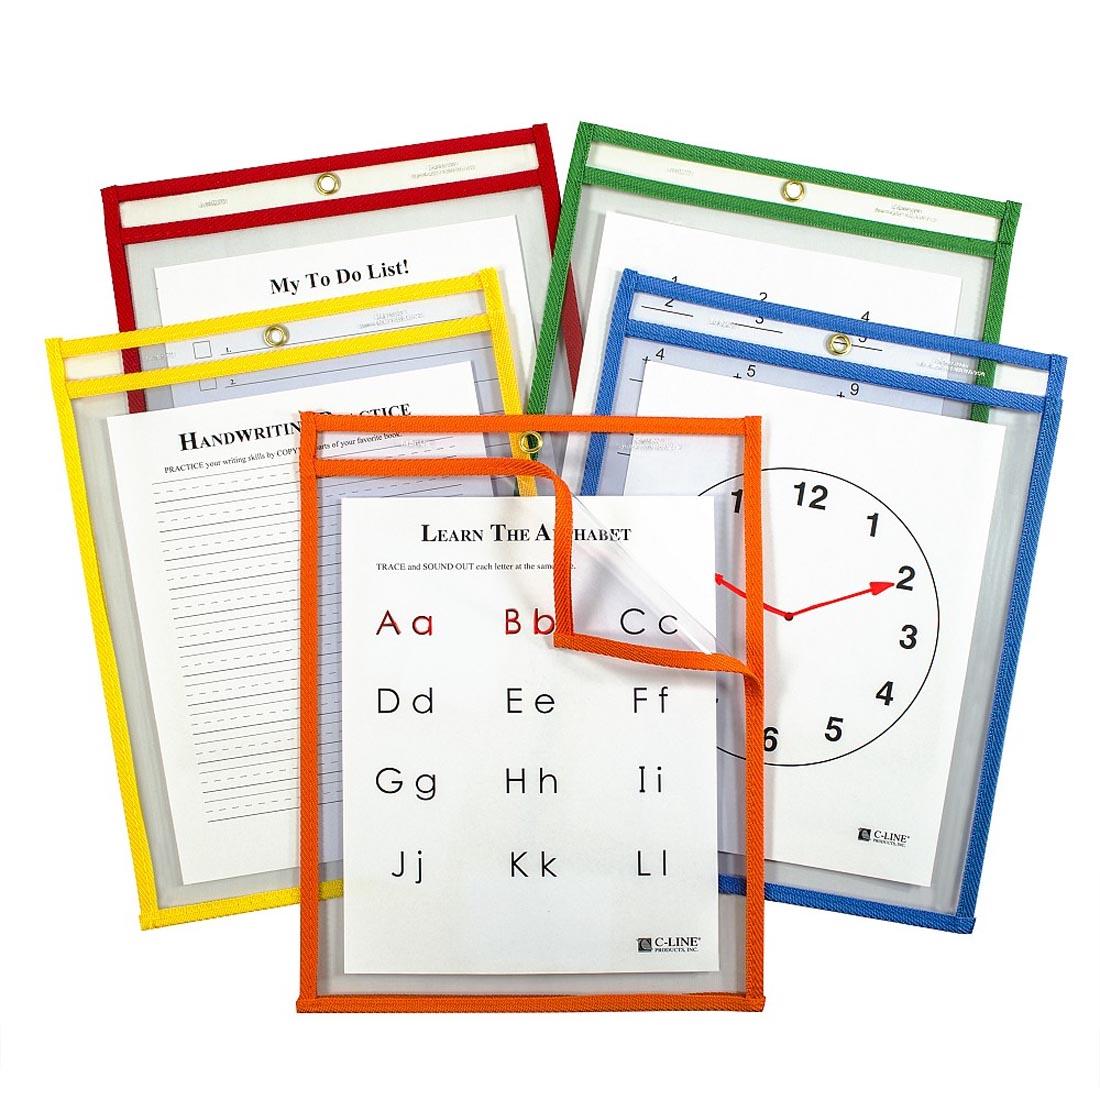 5 Reusable Dry Erase Pockets shown with worksheets inside